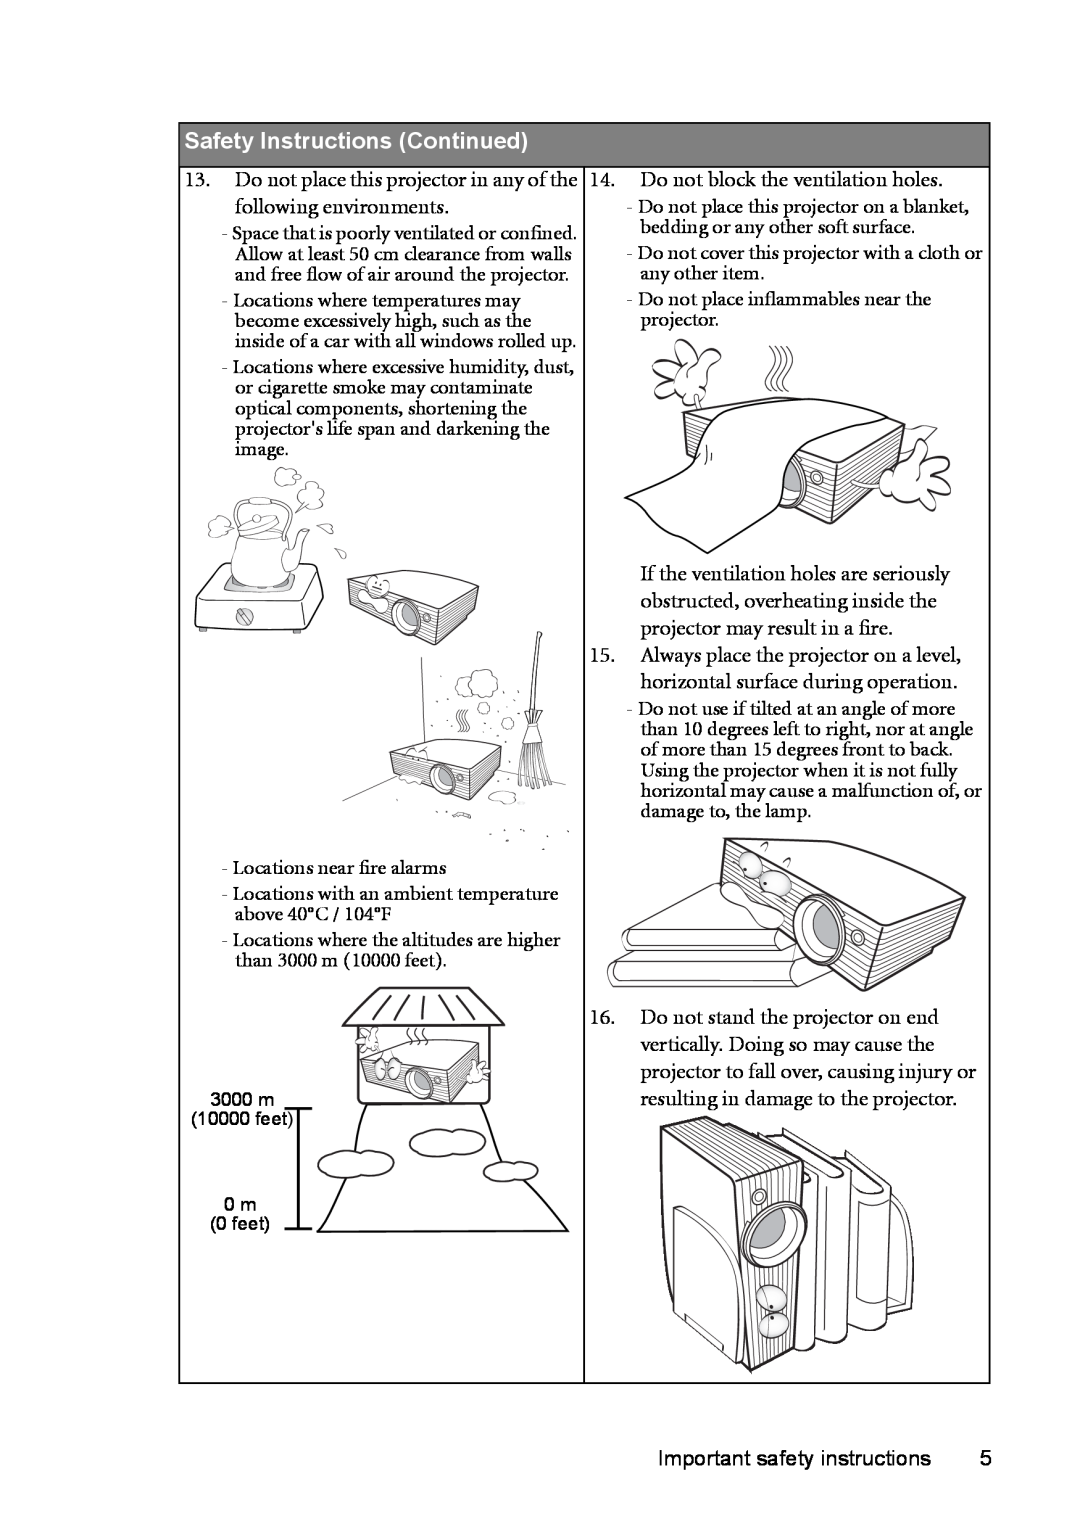 BenQ MP723 user manual Safety Instructions Continued, Space that is poorly ventilated or confined, 3000 m, feet 